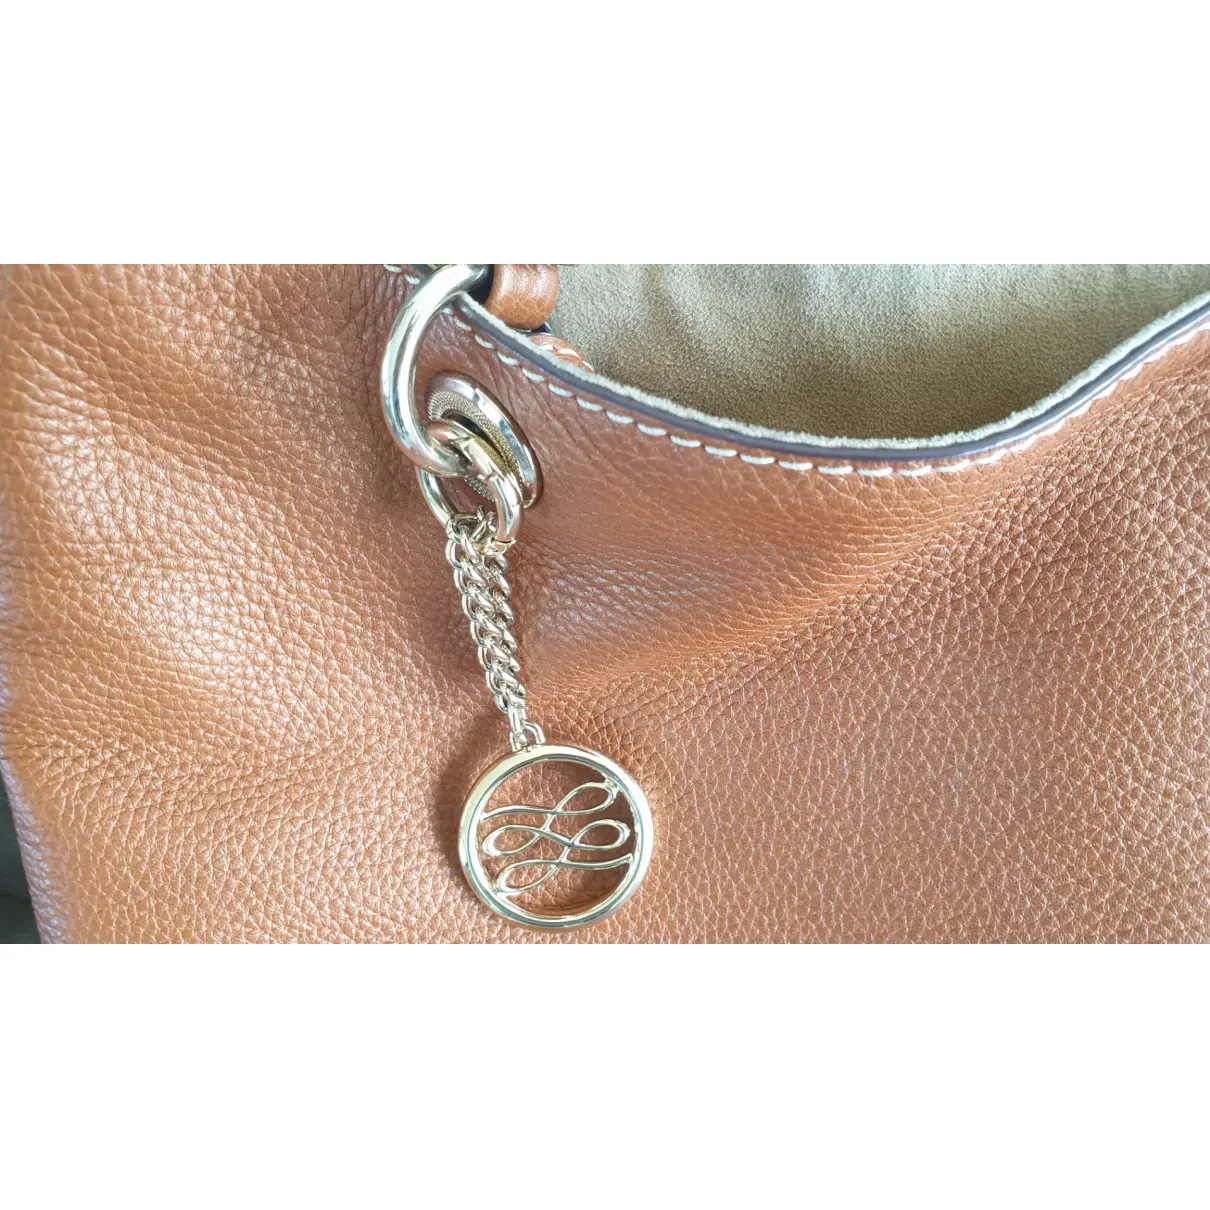 French Flair leather tote Lancel